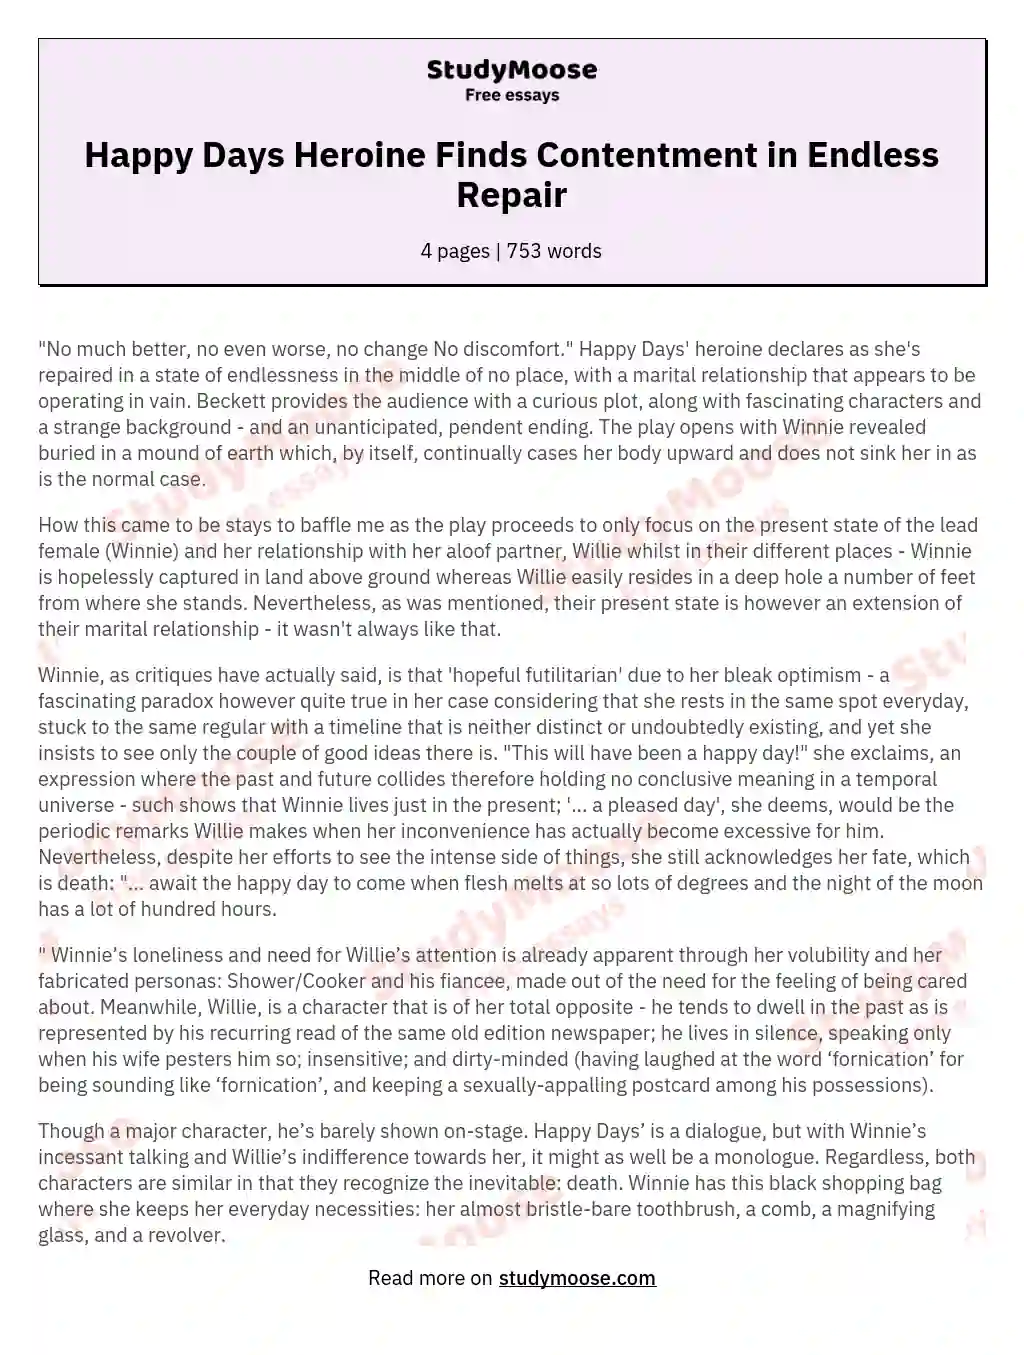 Happy Days Heroine Finds Contentment in Endless Repair essay